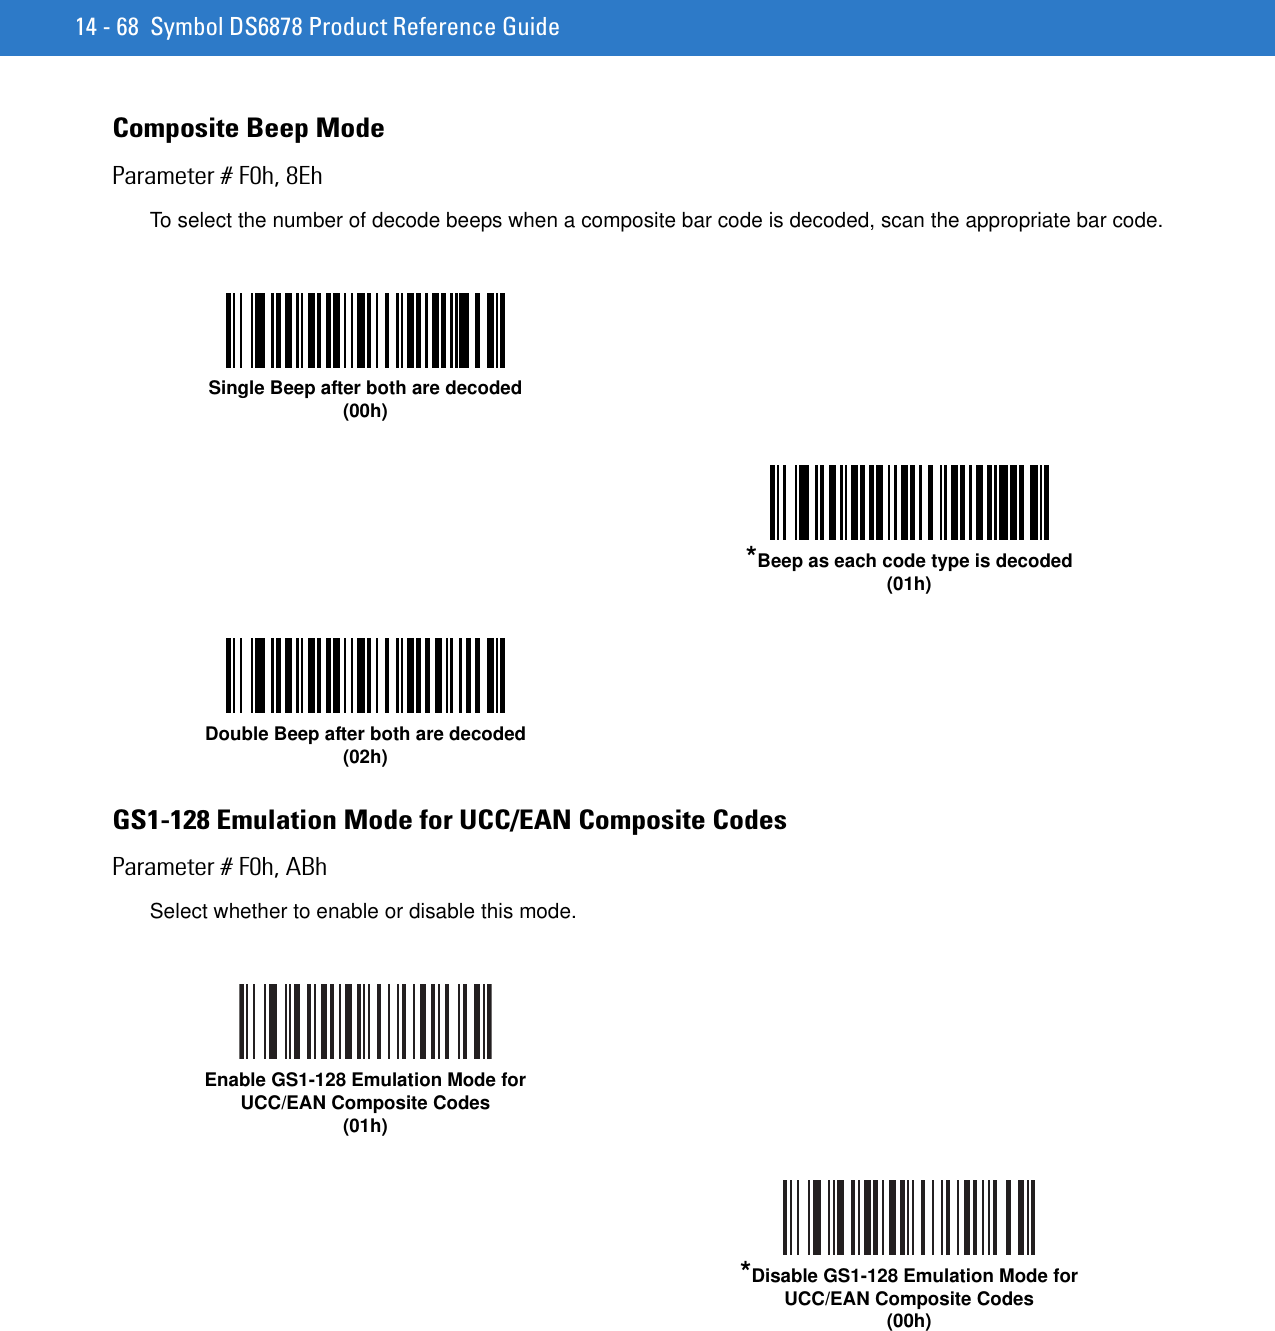 14 - 68 Symbol DS6878 Product Reference GuideComposite Beep ModeParameter # F0h, 8EhTo select the number of decode beeps when a composite bar code is decoded, scan the appropriate bar code. GS1-128 Emulation Mode for UCC/EAN Composite CodesParameter # F0h, ABhSelect whether to enable or disable this mode. Single Beep after both are decoded(00h)*Beep as each code type is decoded(01h)Double Beep after both are decoded(02h)Enable GS1-128 Emulation Mode for UCC/EAN Composite Codes(01h)*Disable GS1-128 Emulation Mode for UCC/EAN Composite Codes(00h)